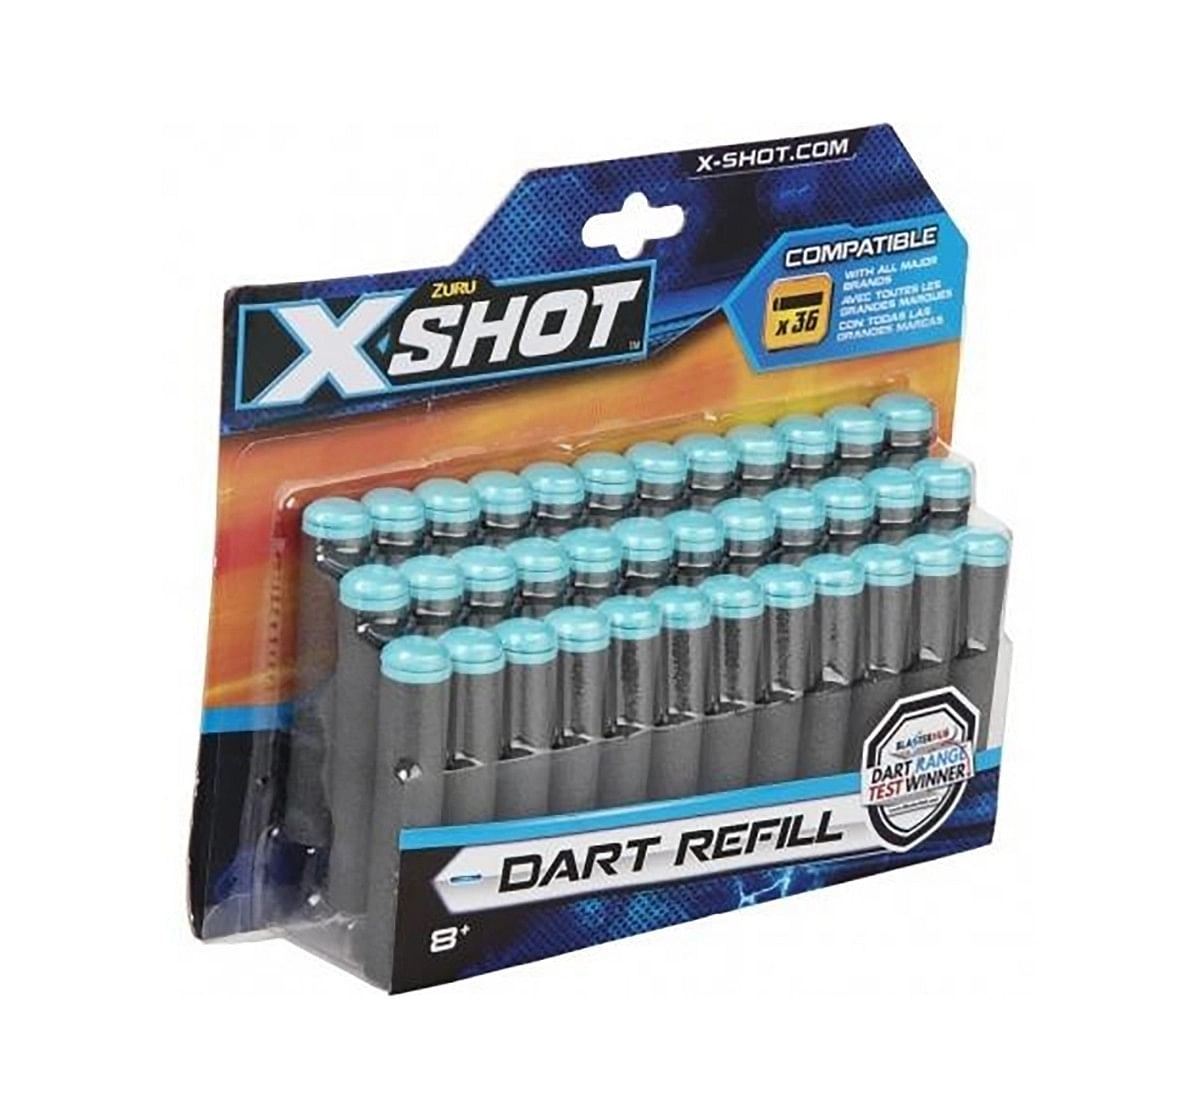 X-Shot 36 Darts Refill Pack Target Games  for Kids age 8Y+ (Grey)